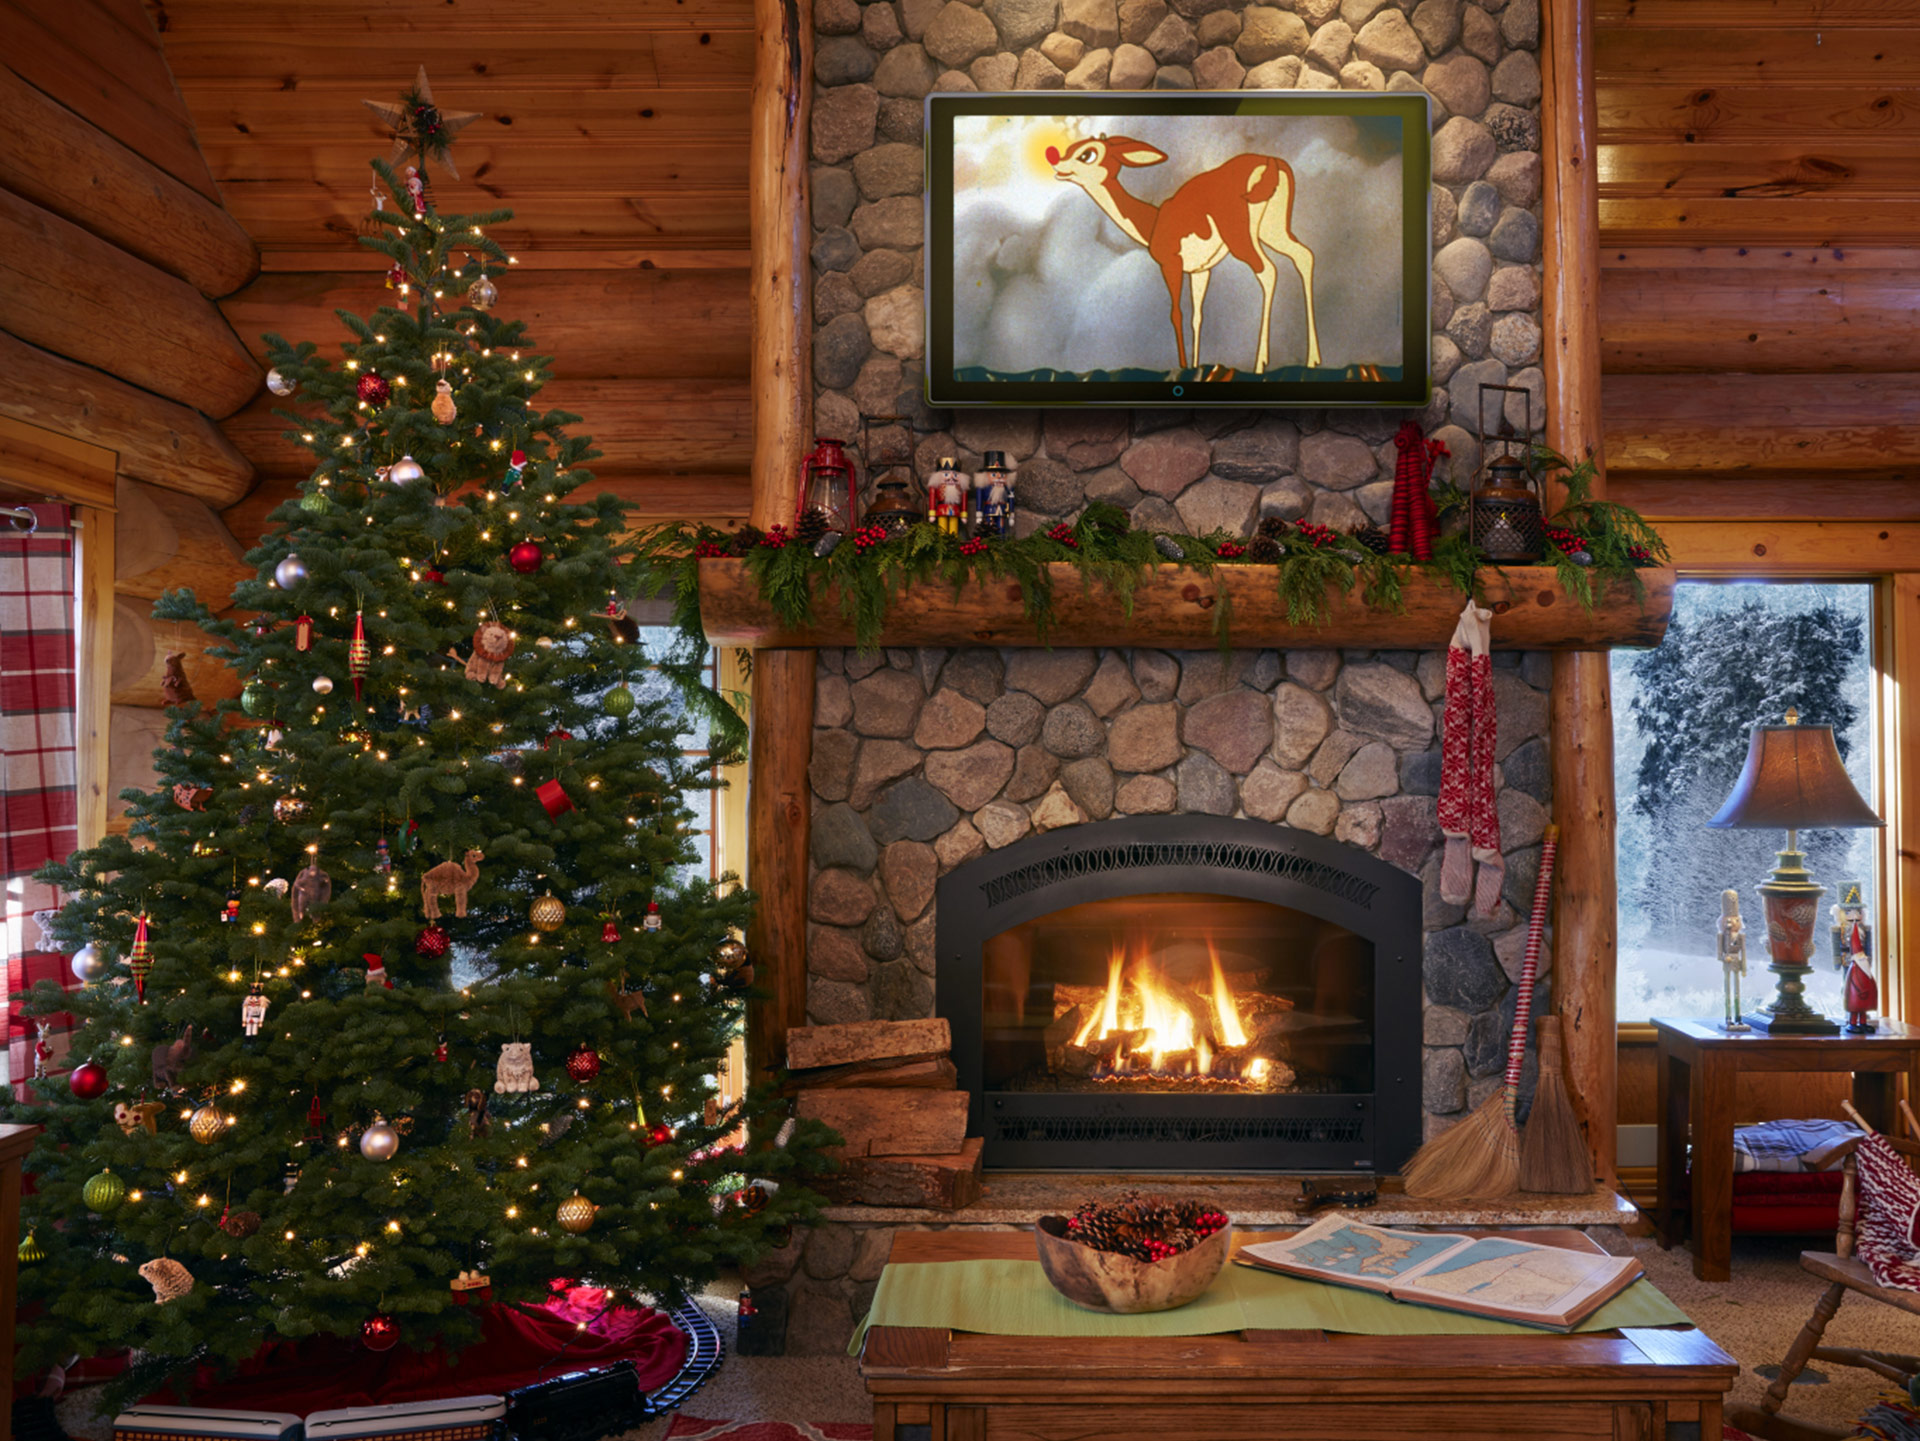 Amazing images from inside Santa's home